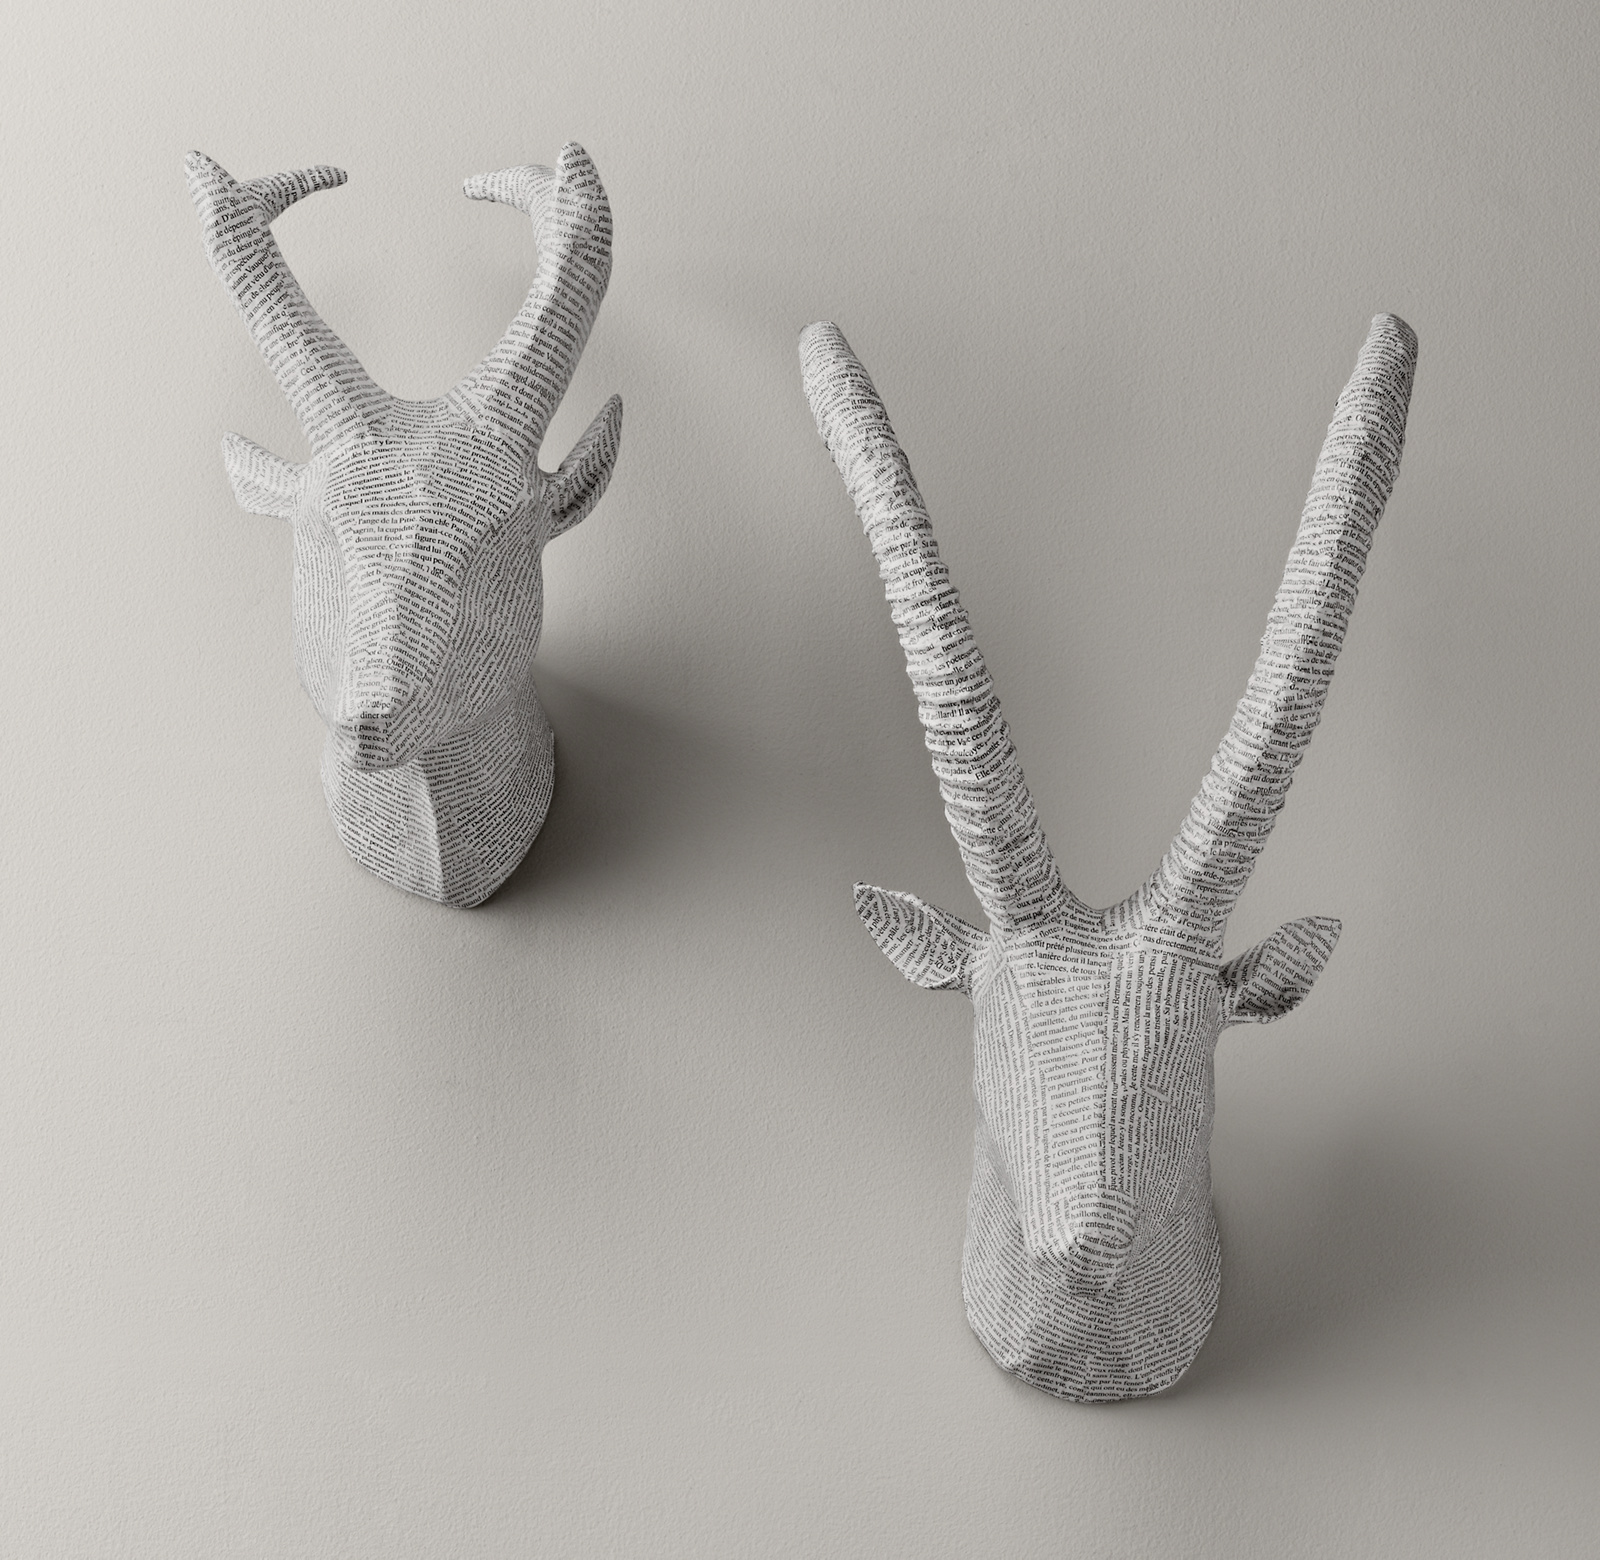 Shown (left to right) in Pronghorn and Sable.